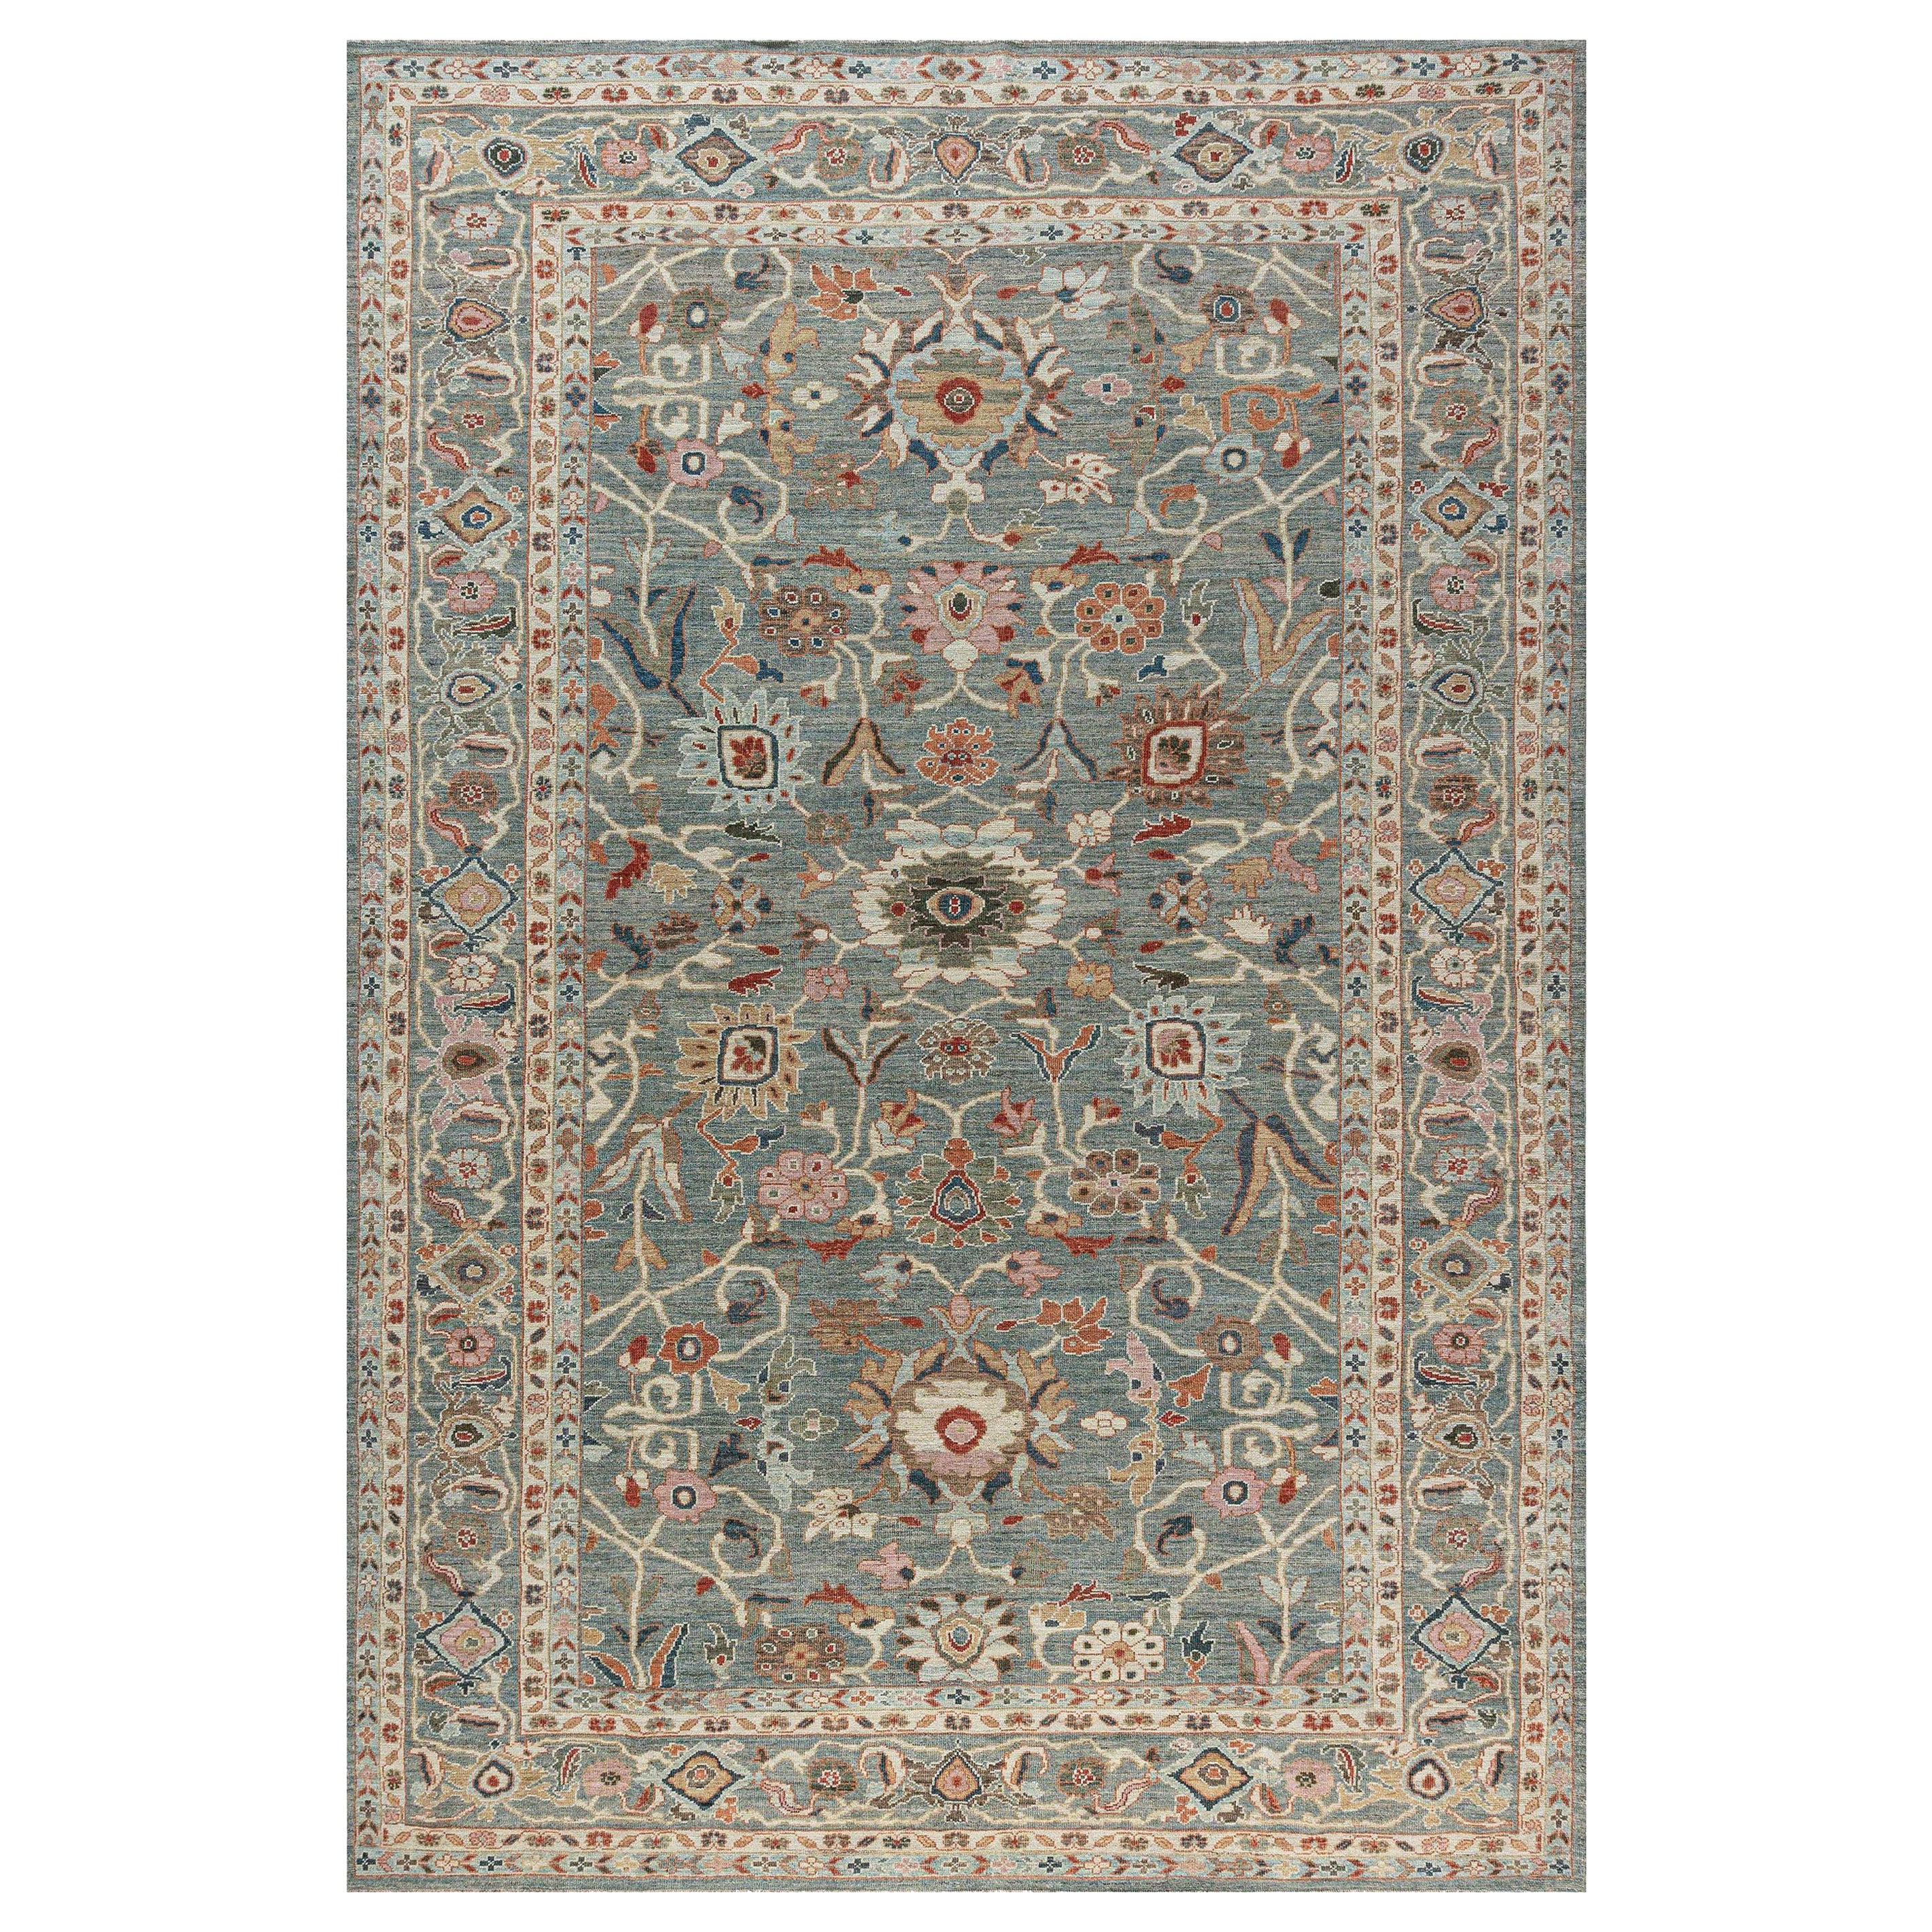 Contemporary Sultanabad Inspired Handmade Wool Rug by Doris Leslie Blau For Sale